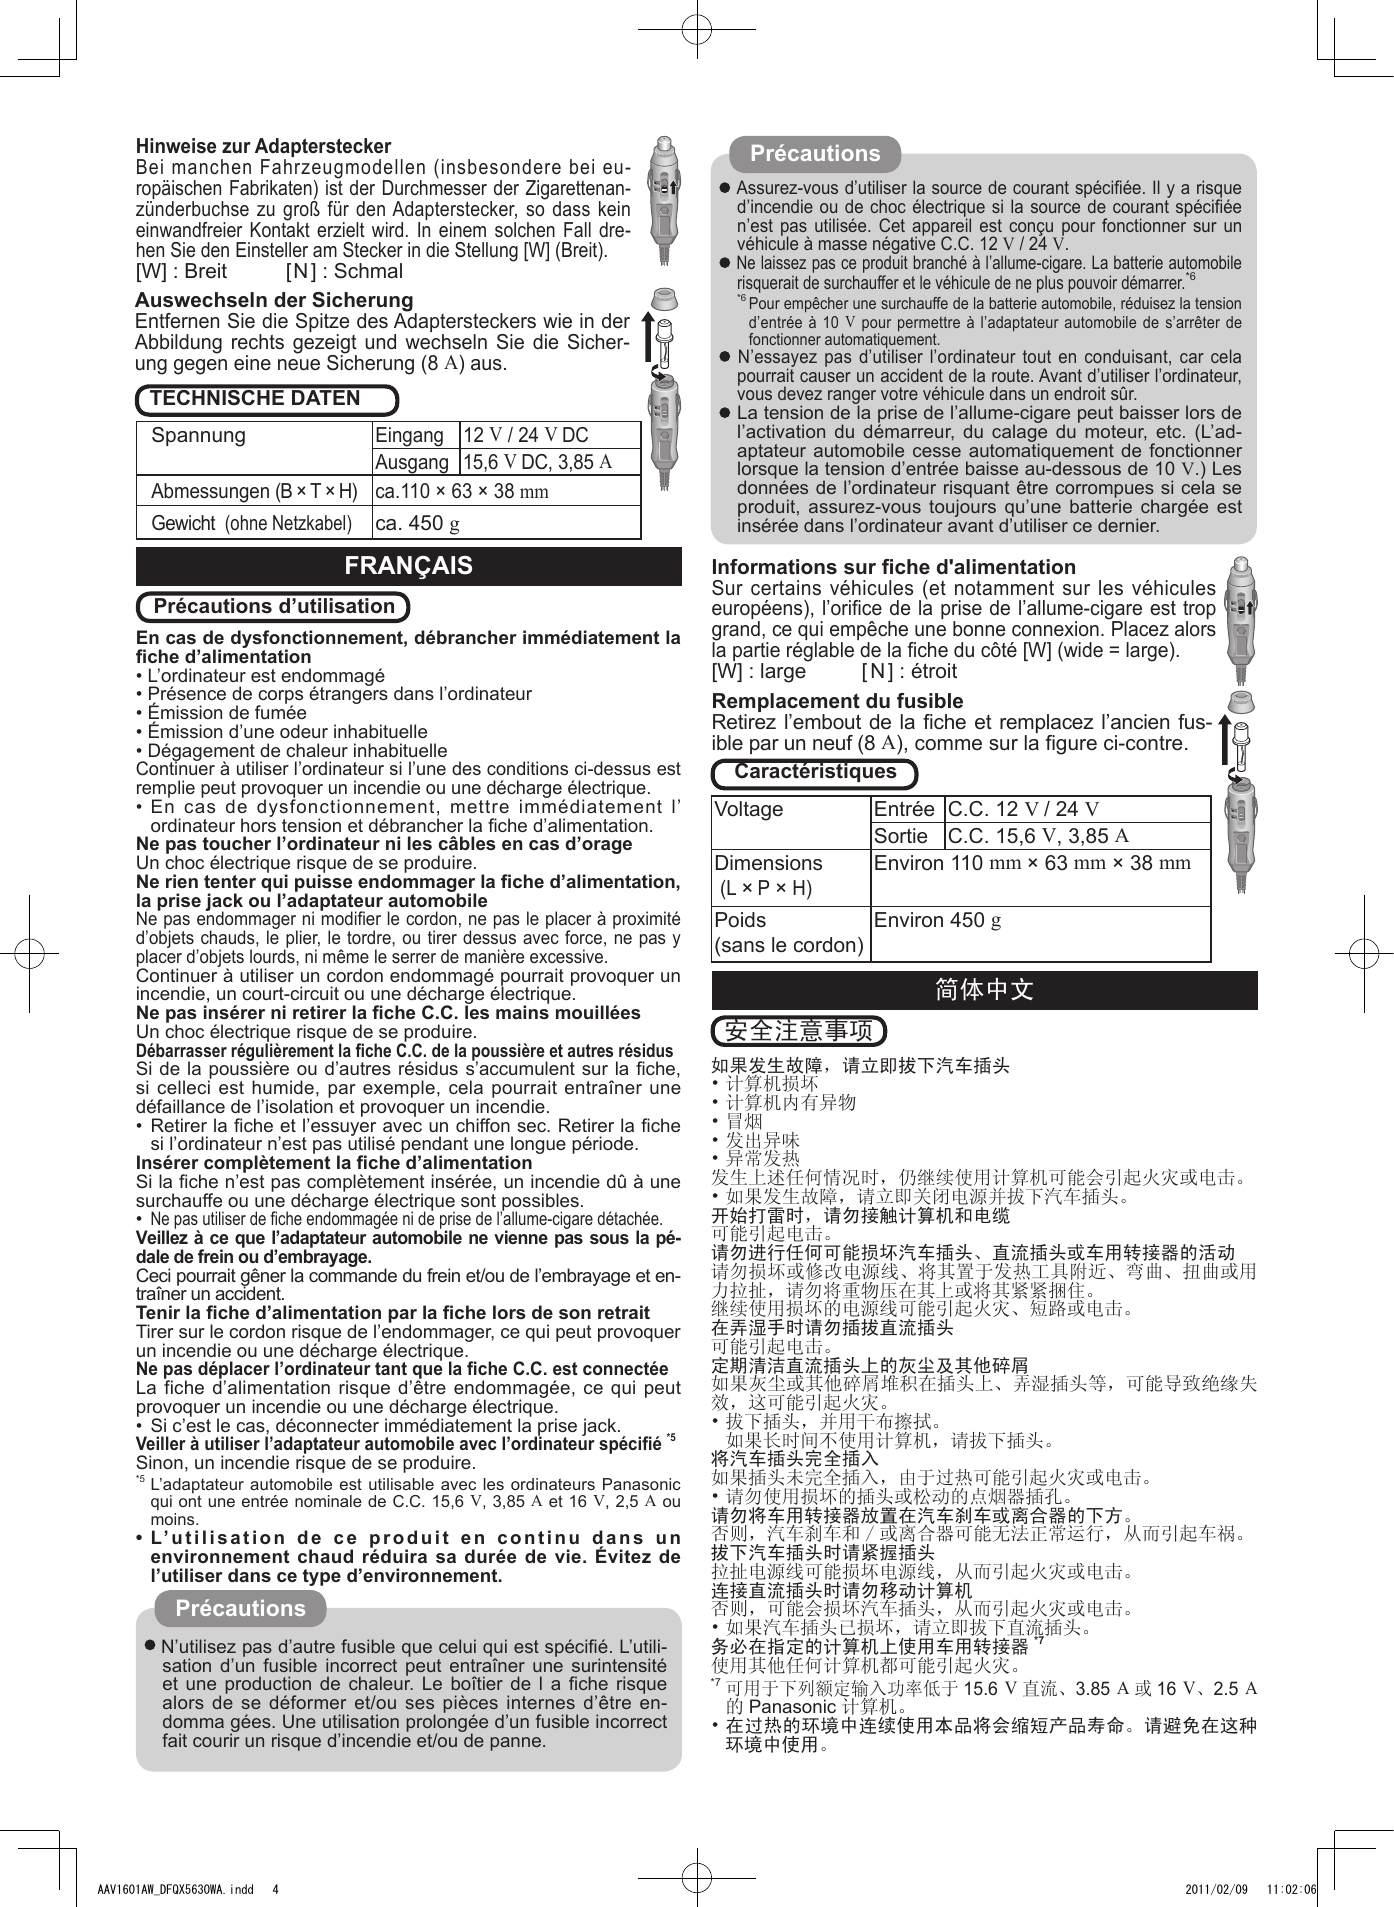 Page 3 of 8 - Panasonic CF-AAxxxx (AC Adapter) 使用手册 : Operating Instructions (English/ German/ French/ Chinese[S]/ Chinese[T]/ Korean/ Japanese) (Revision) Aav1601aw-oi-dfqx5630wa-non-nonlogo-JMGFCSCTKO-p20110072